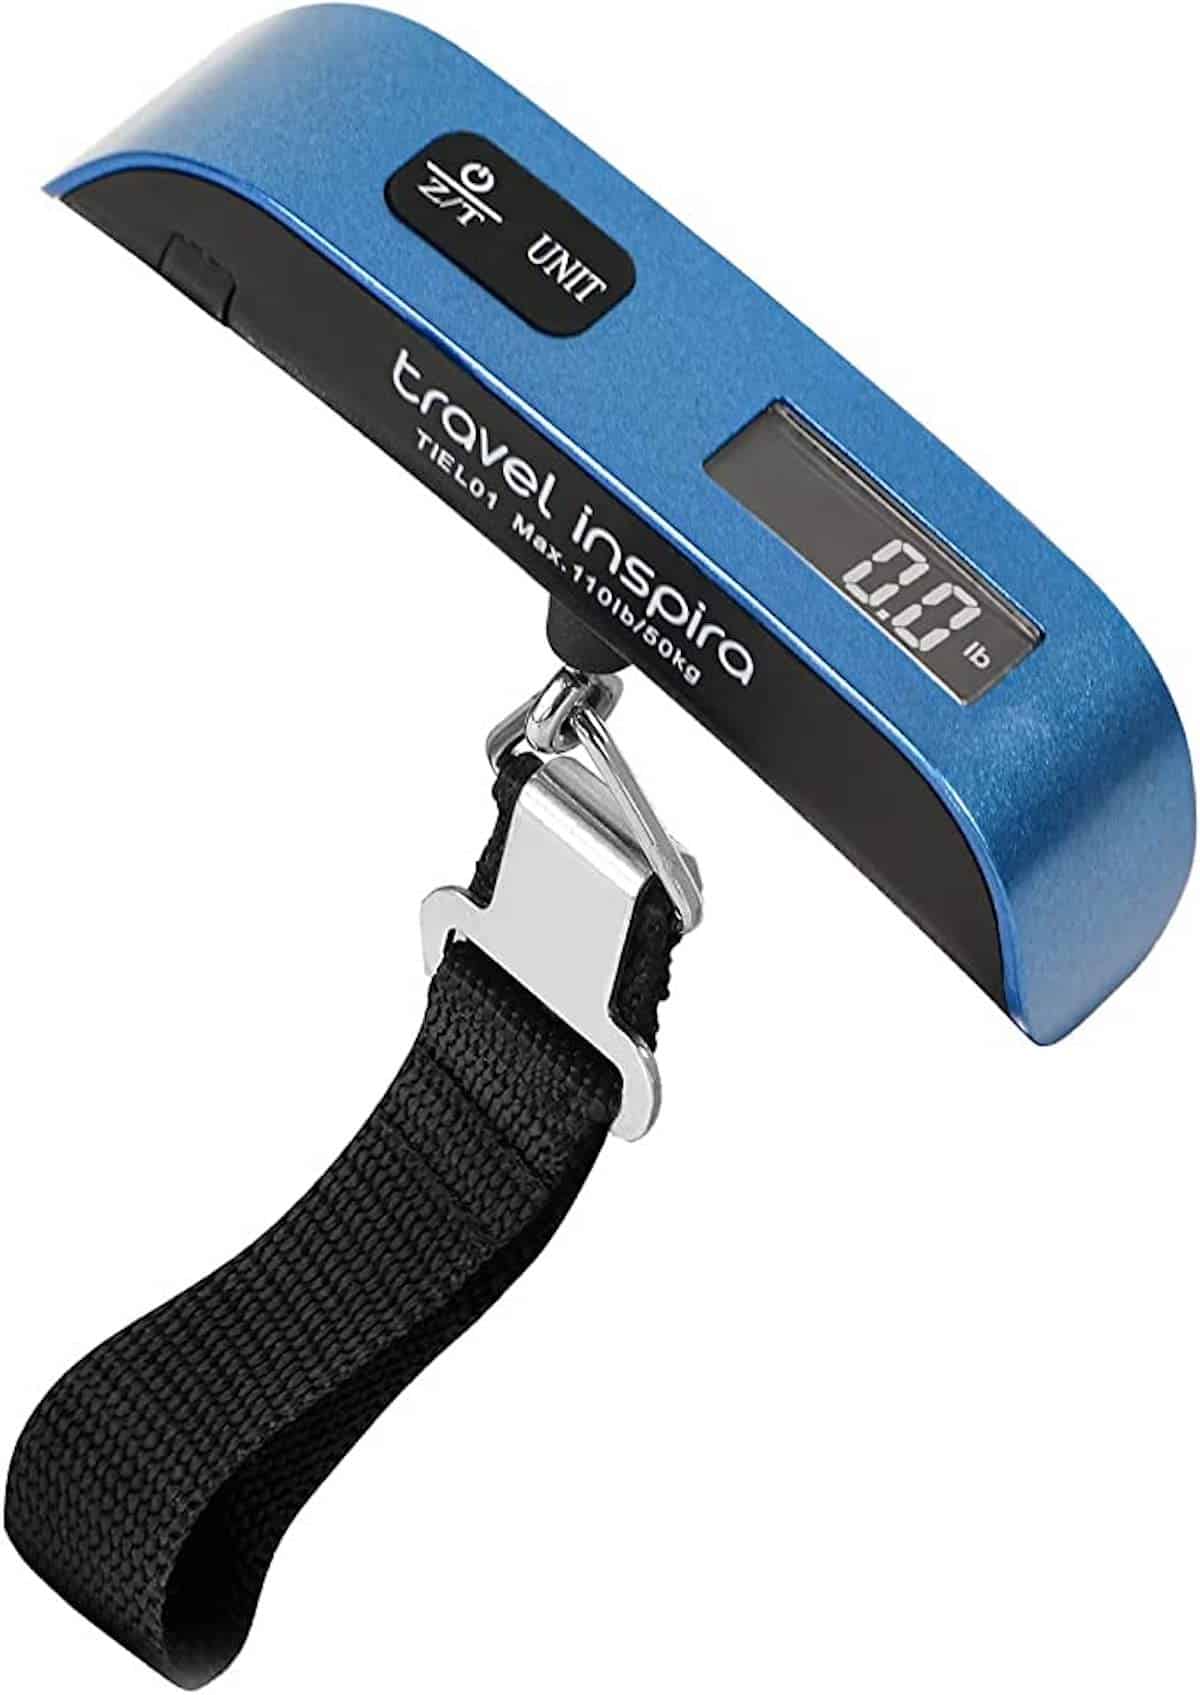 Travel accessories for men: A portable luggage scale